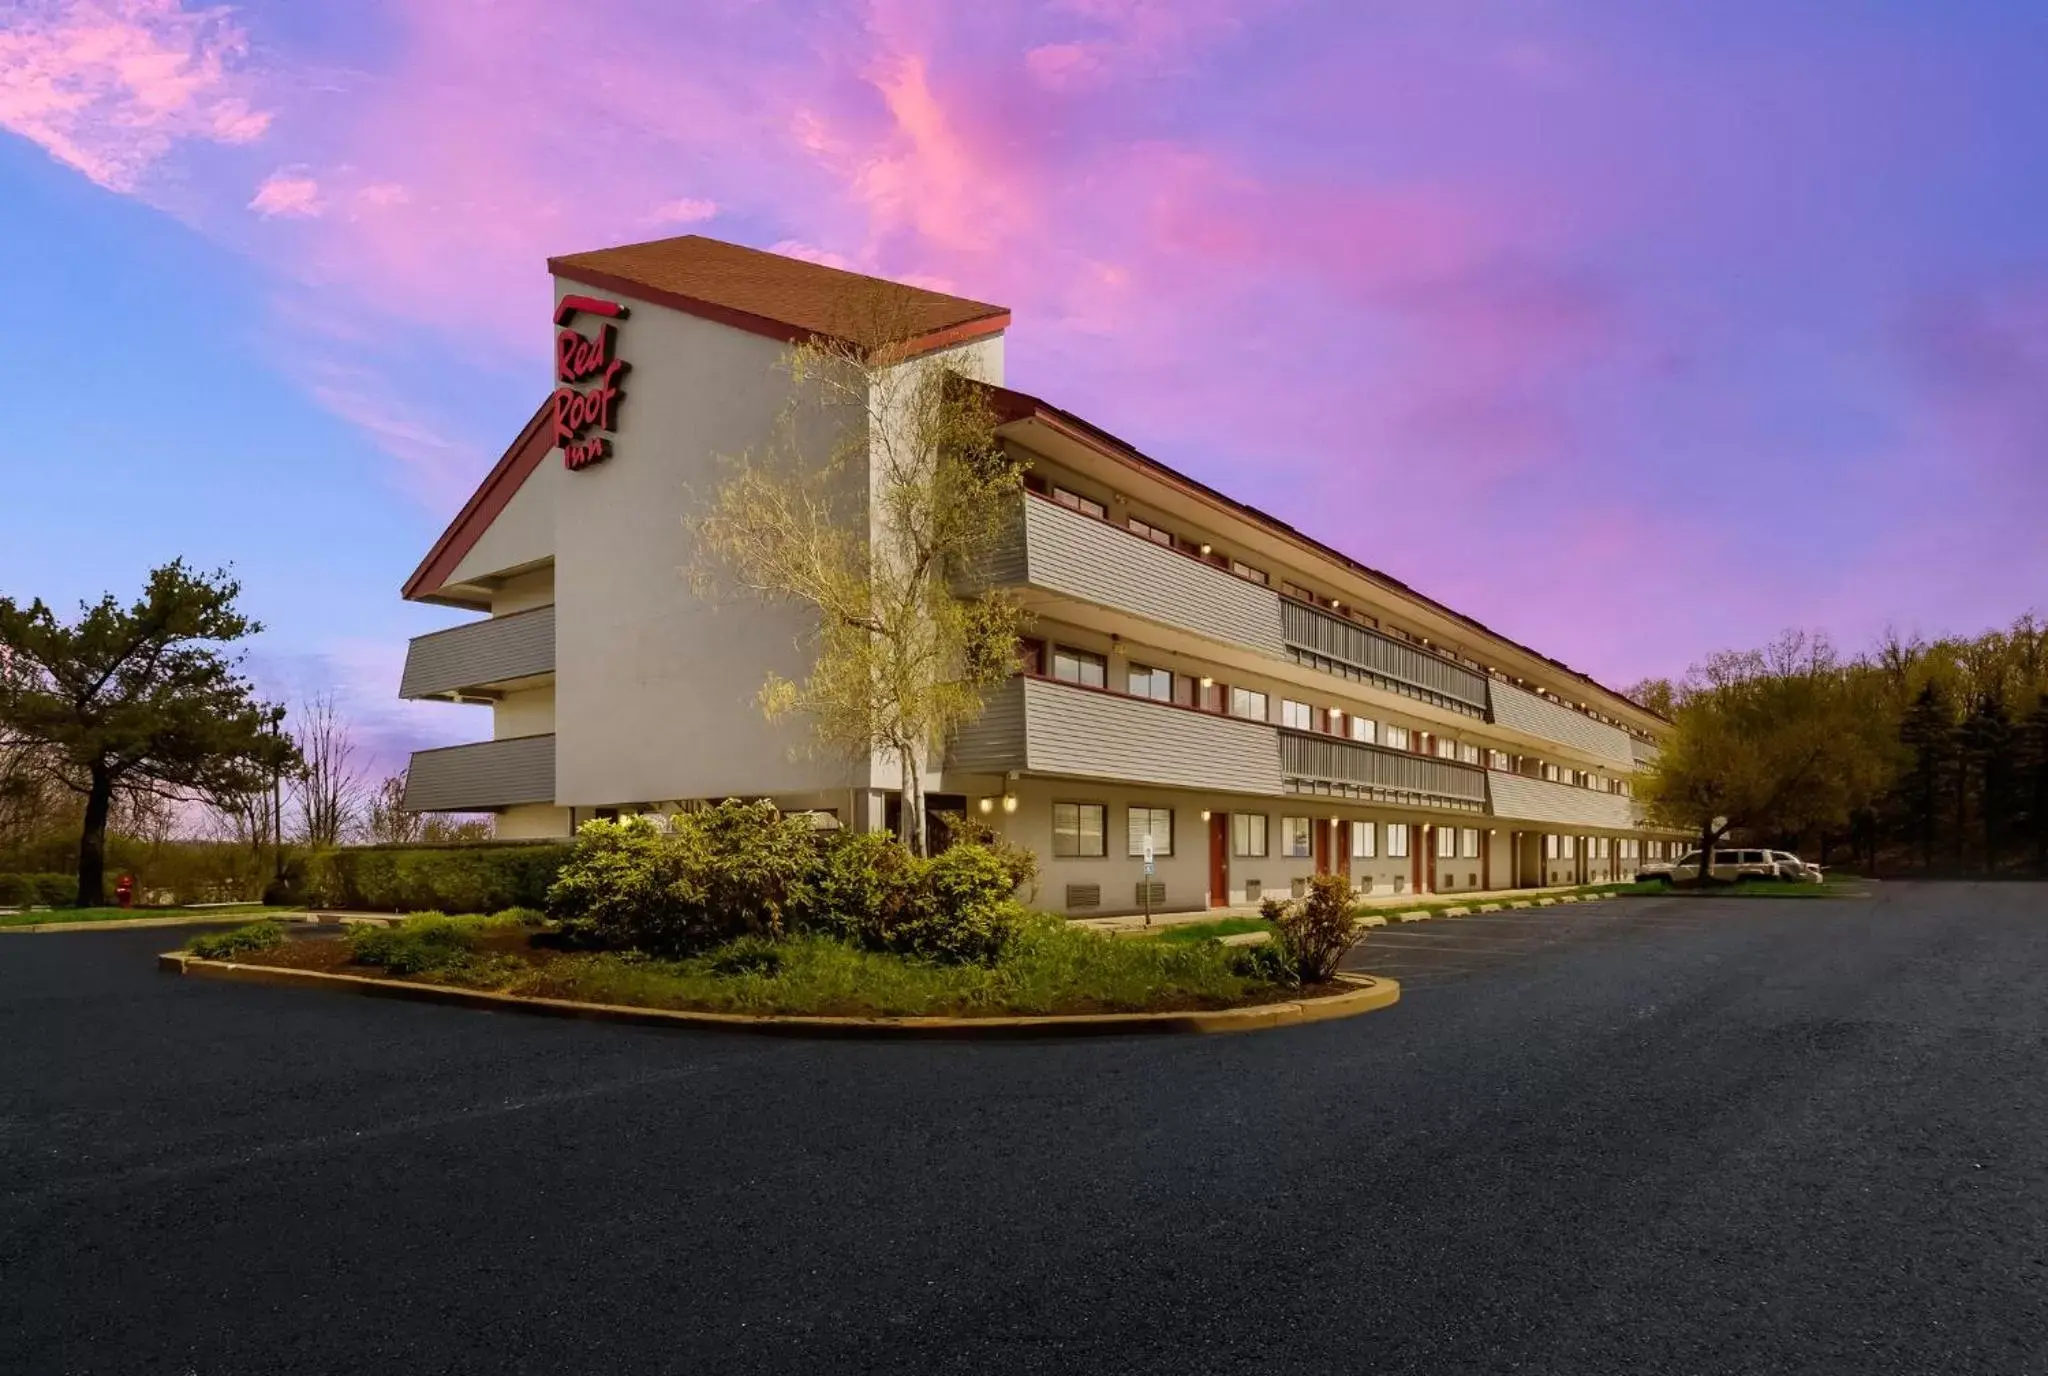 Property Building in Red Roof Inn Wilkes-Barre Arena